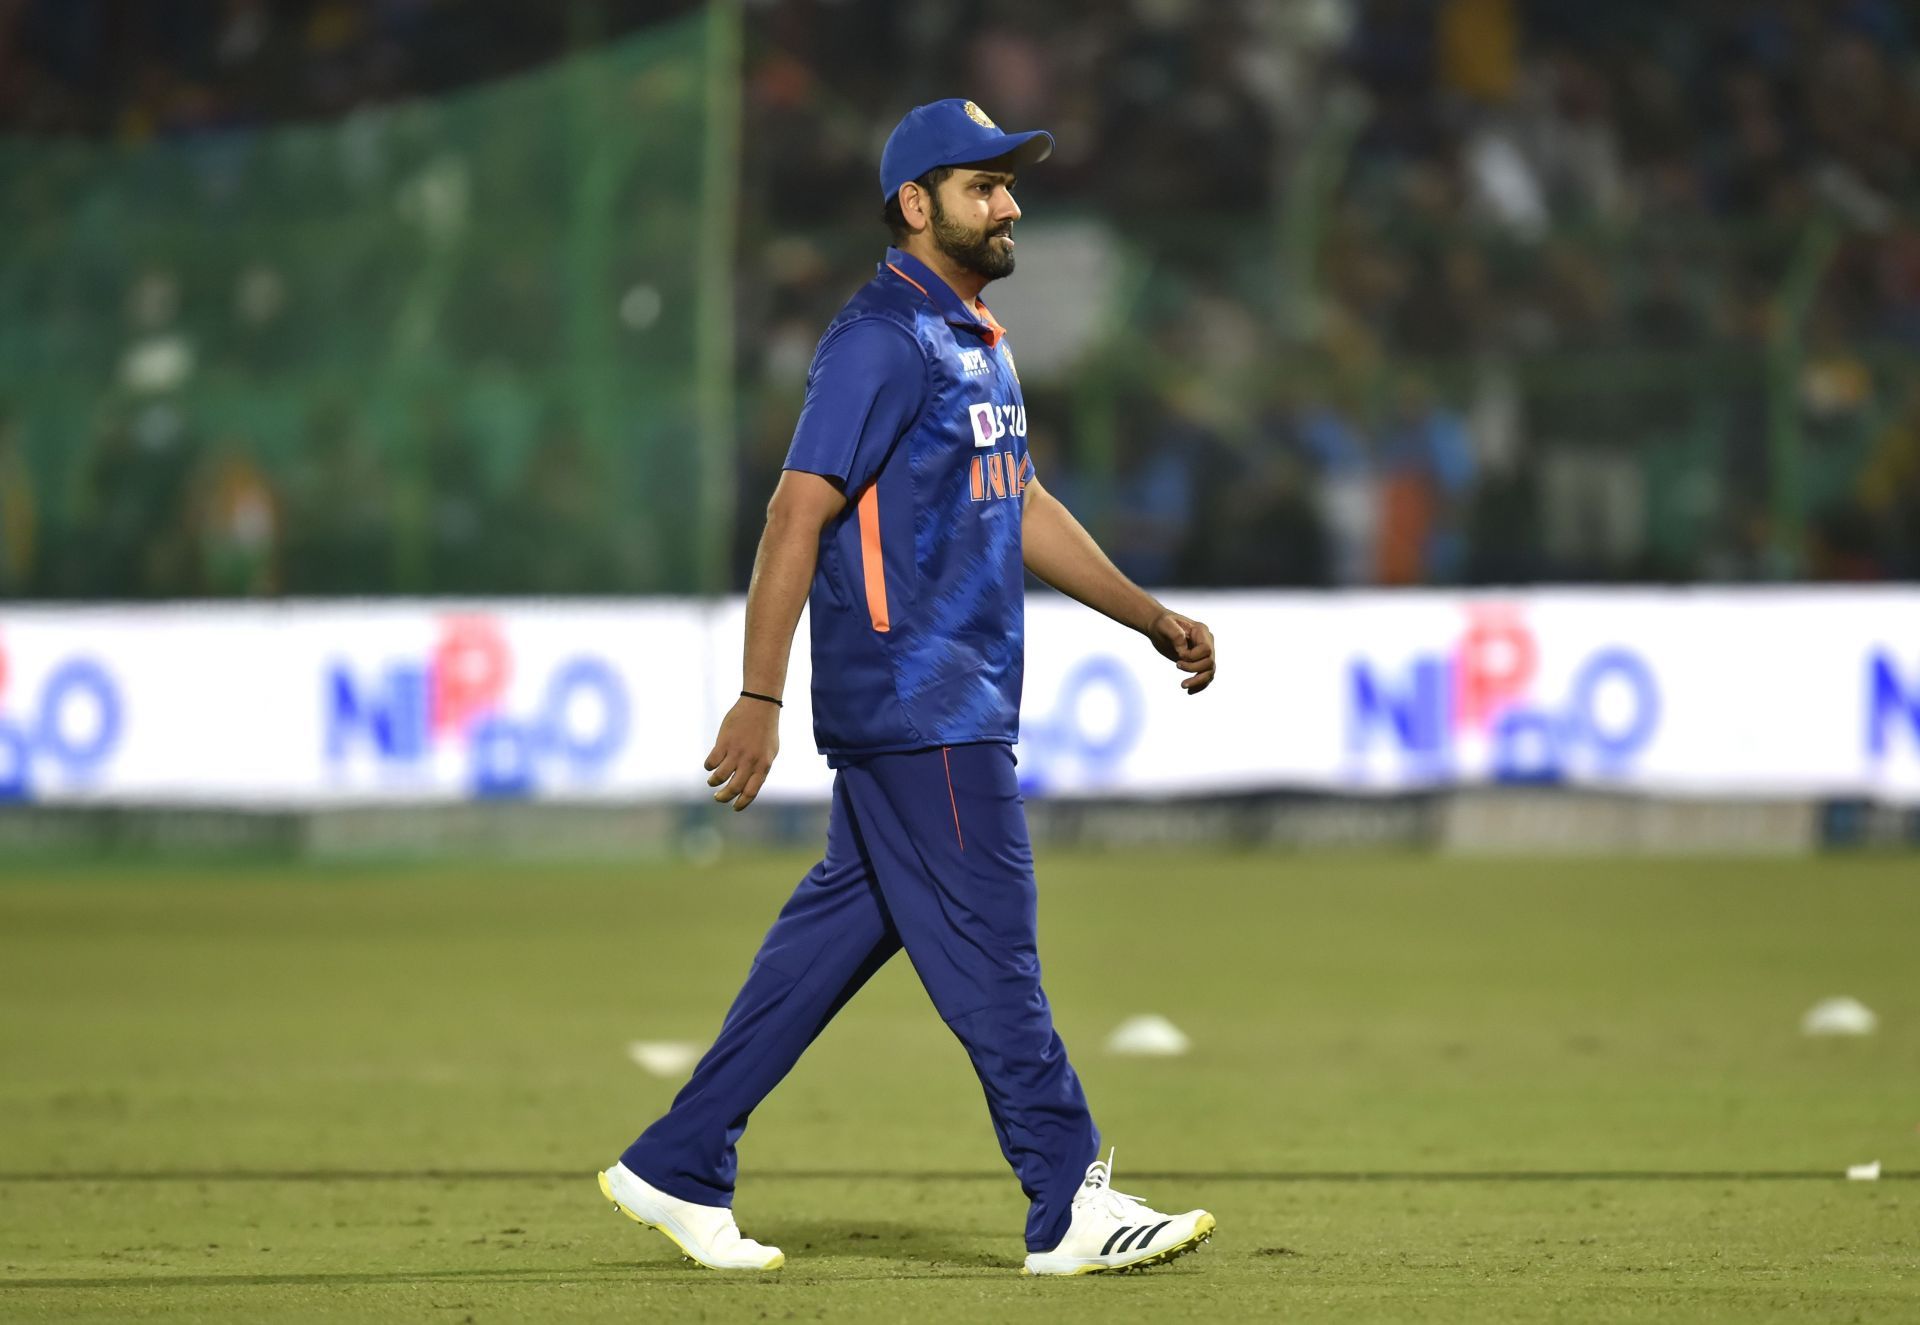 Rohit Sharma is the new captain in limited-over formats for Team India